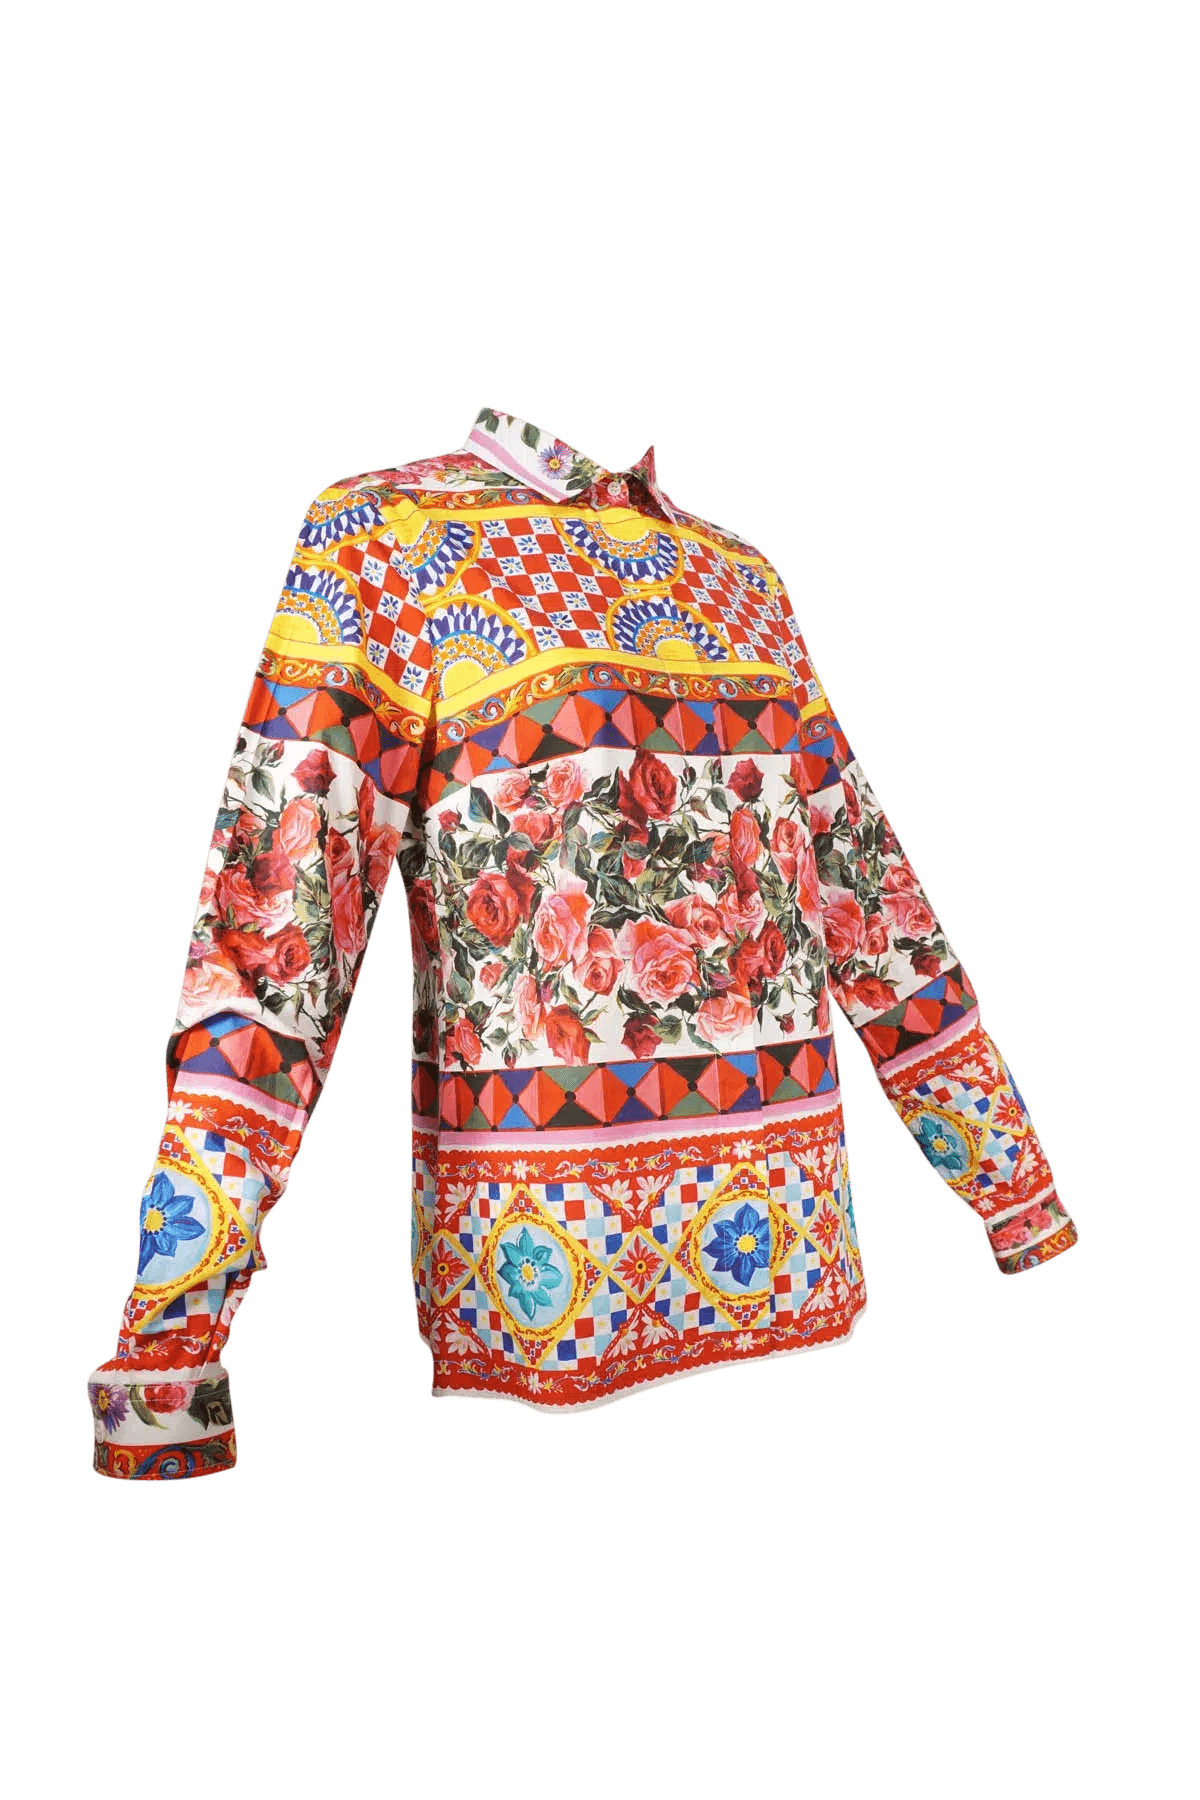 Dolce & Gabbana Multi-Color Italy Mixed Print Blouse Shirt - Foxy Couture Carmel